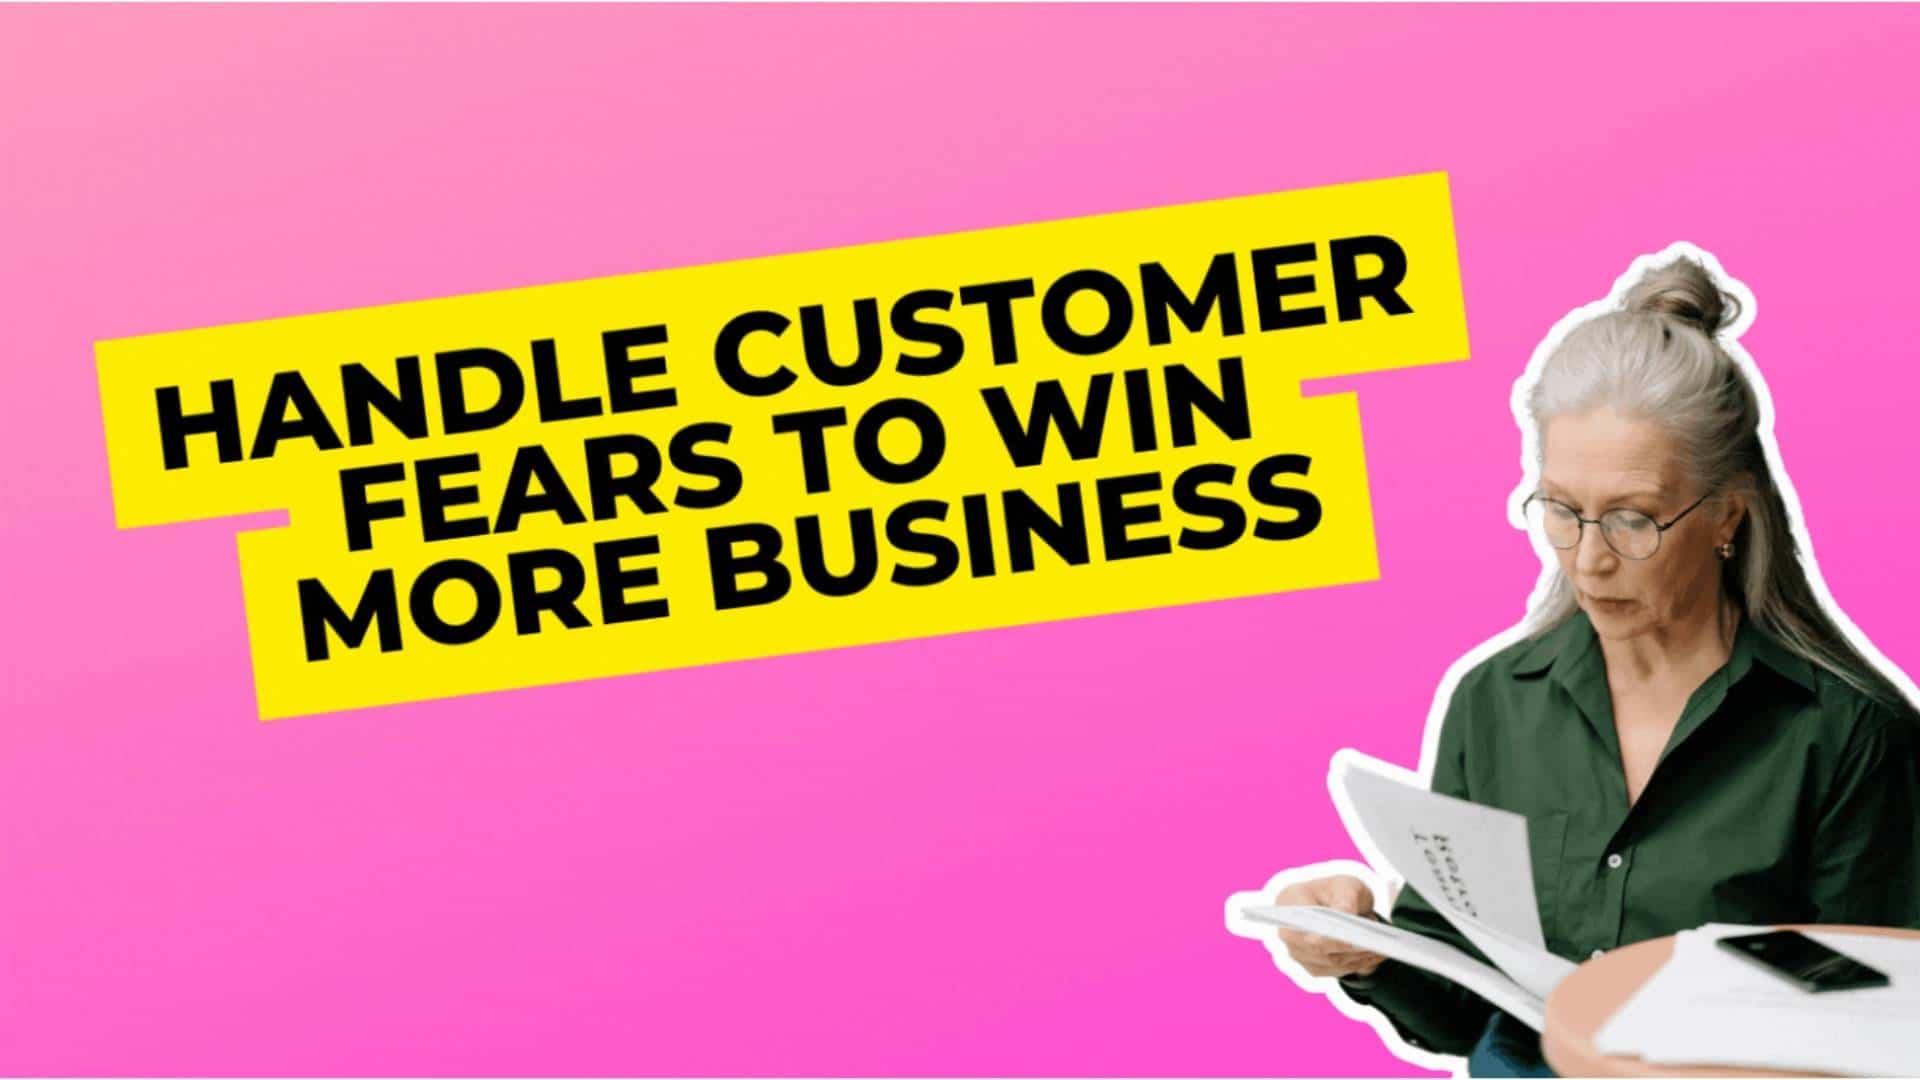 Handle Customer Fears To Win More Business